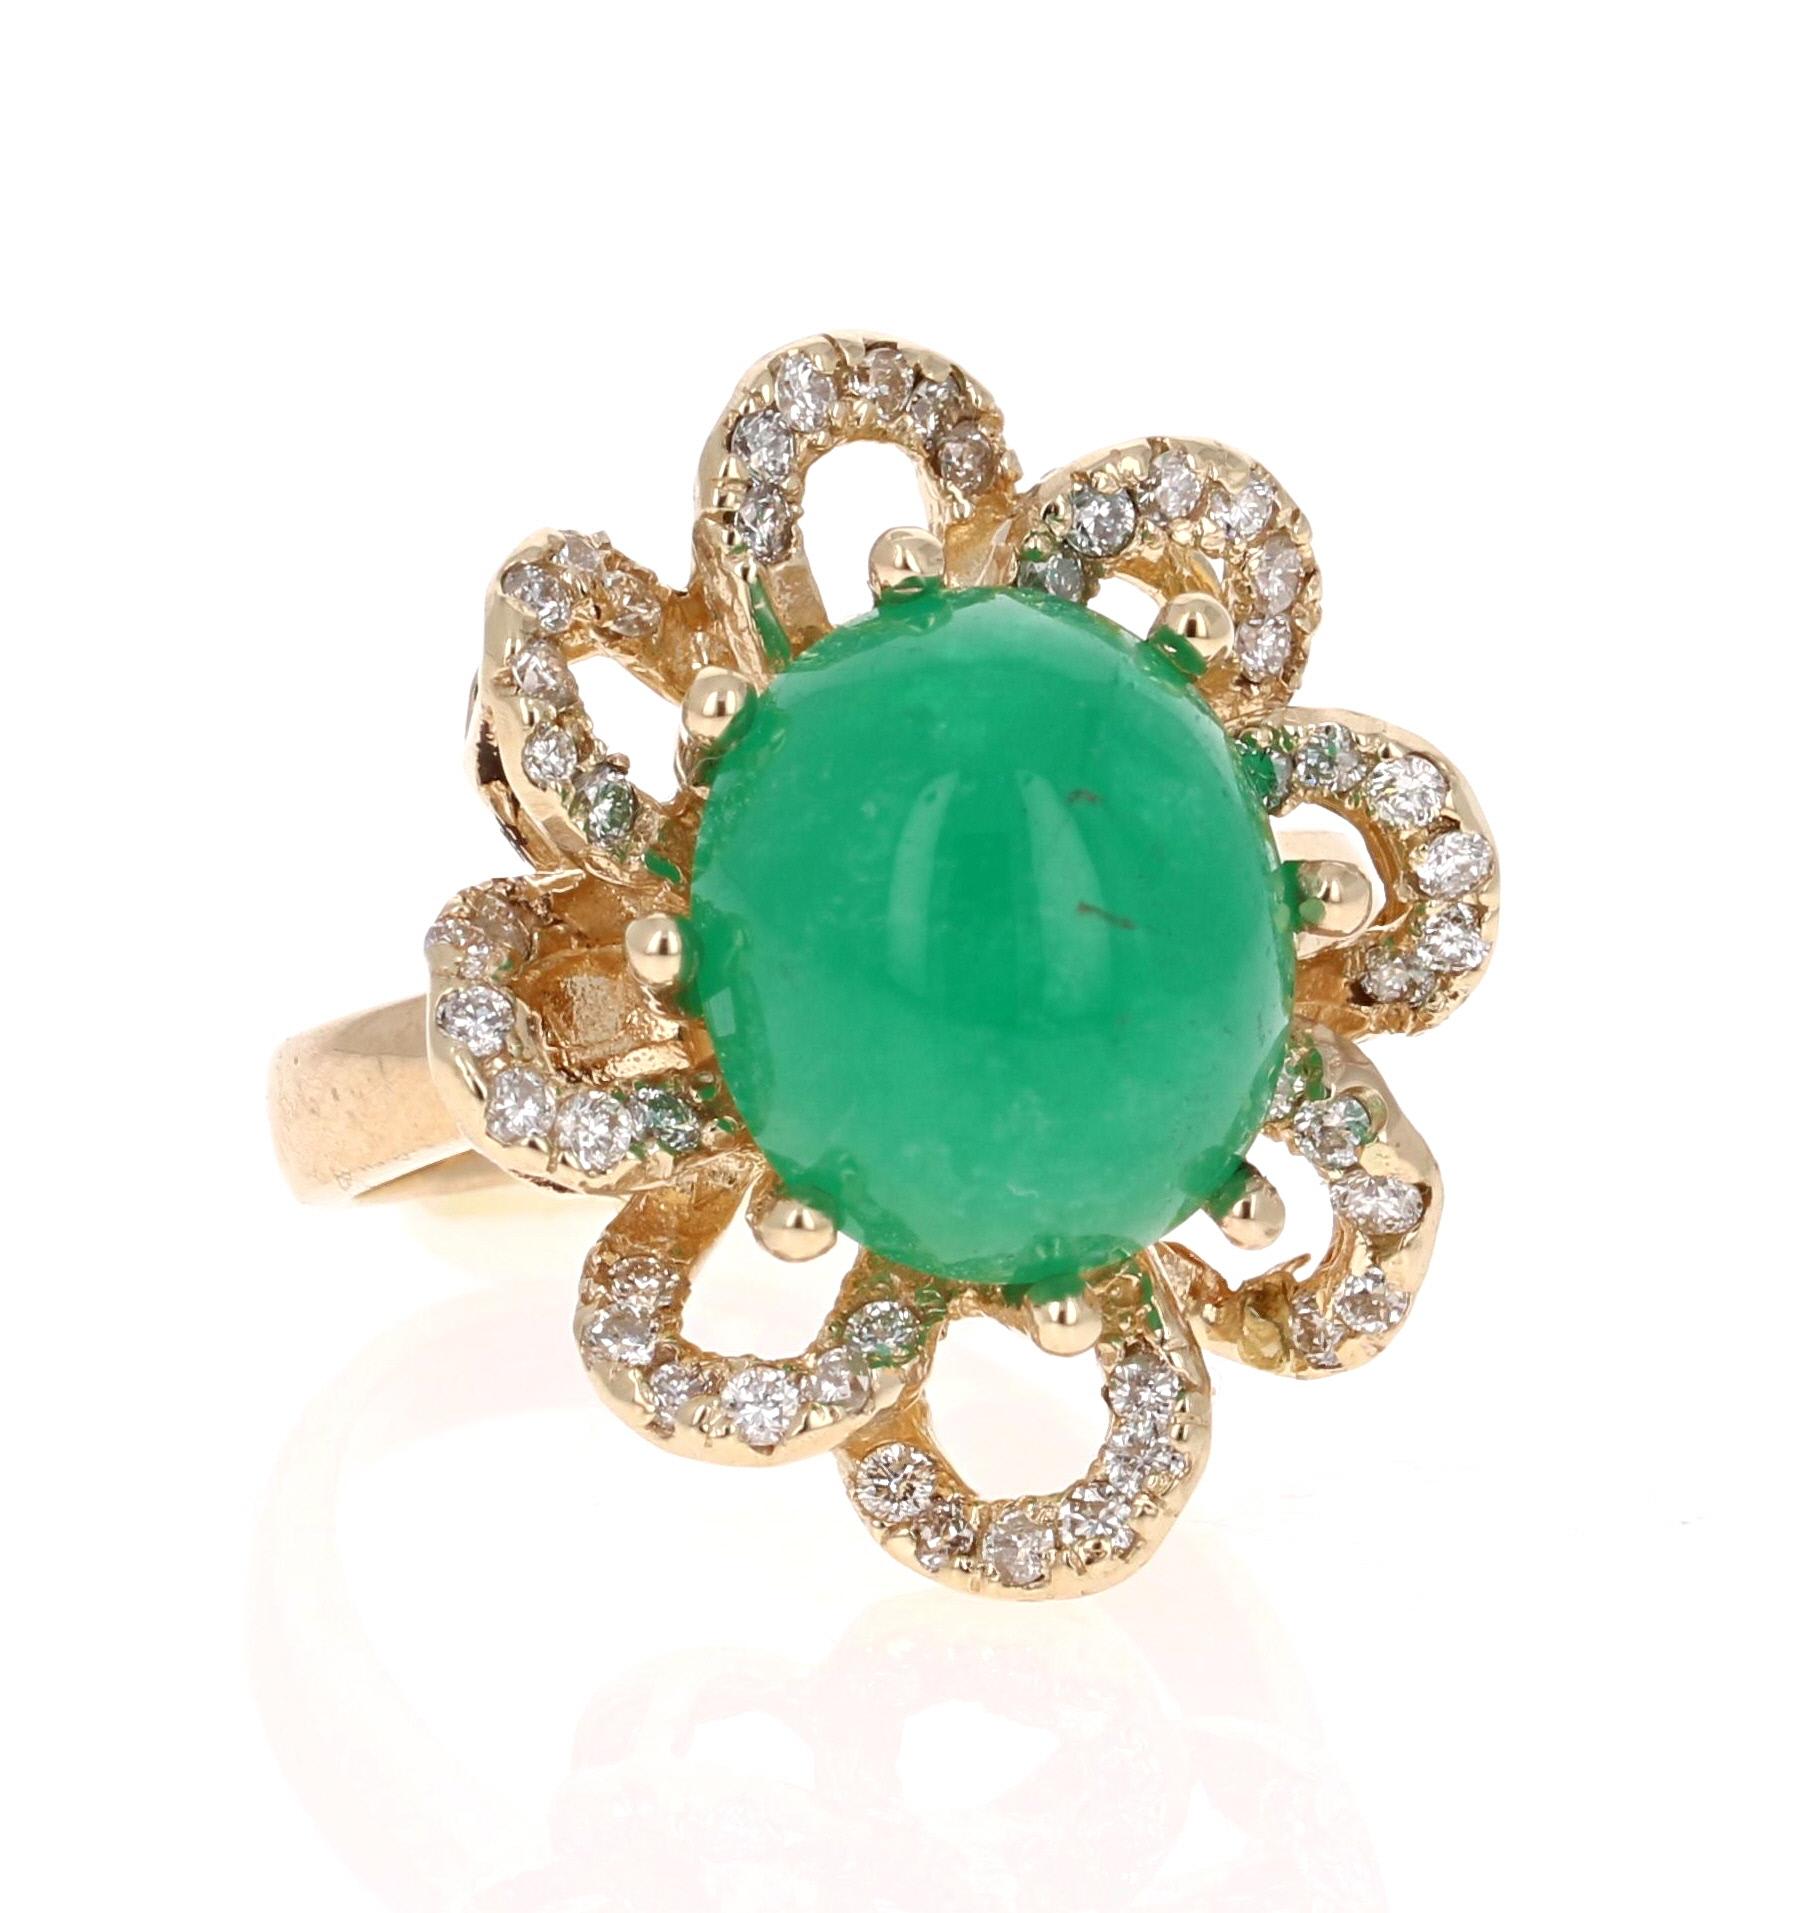 6.24 Carat Cabochon Emerald Diamond Yellow Gold Cocktail Ring

The most unique ring of all! A beautiful Cabochon Emerald sits in the center of the ring and is surrounded by a cluster of 48 Round Cut Diamonds.

The carat weight of the stones are as